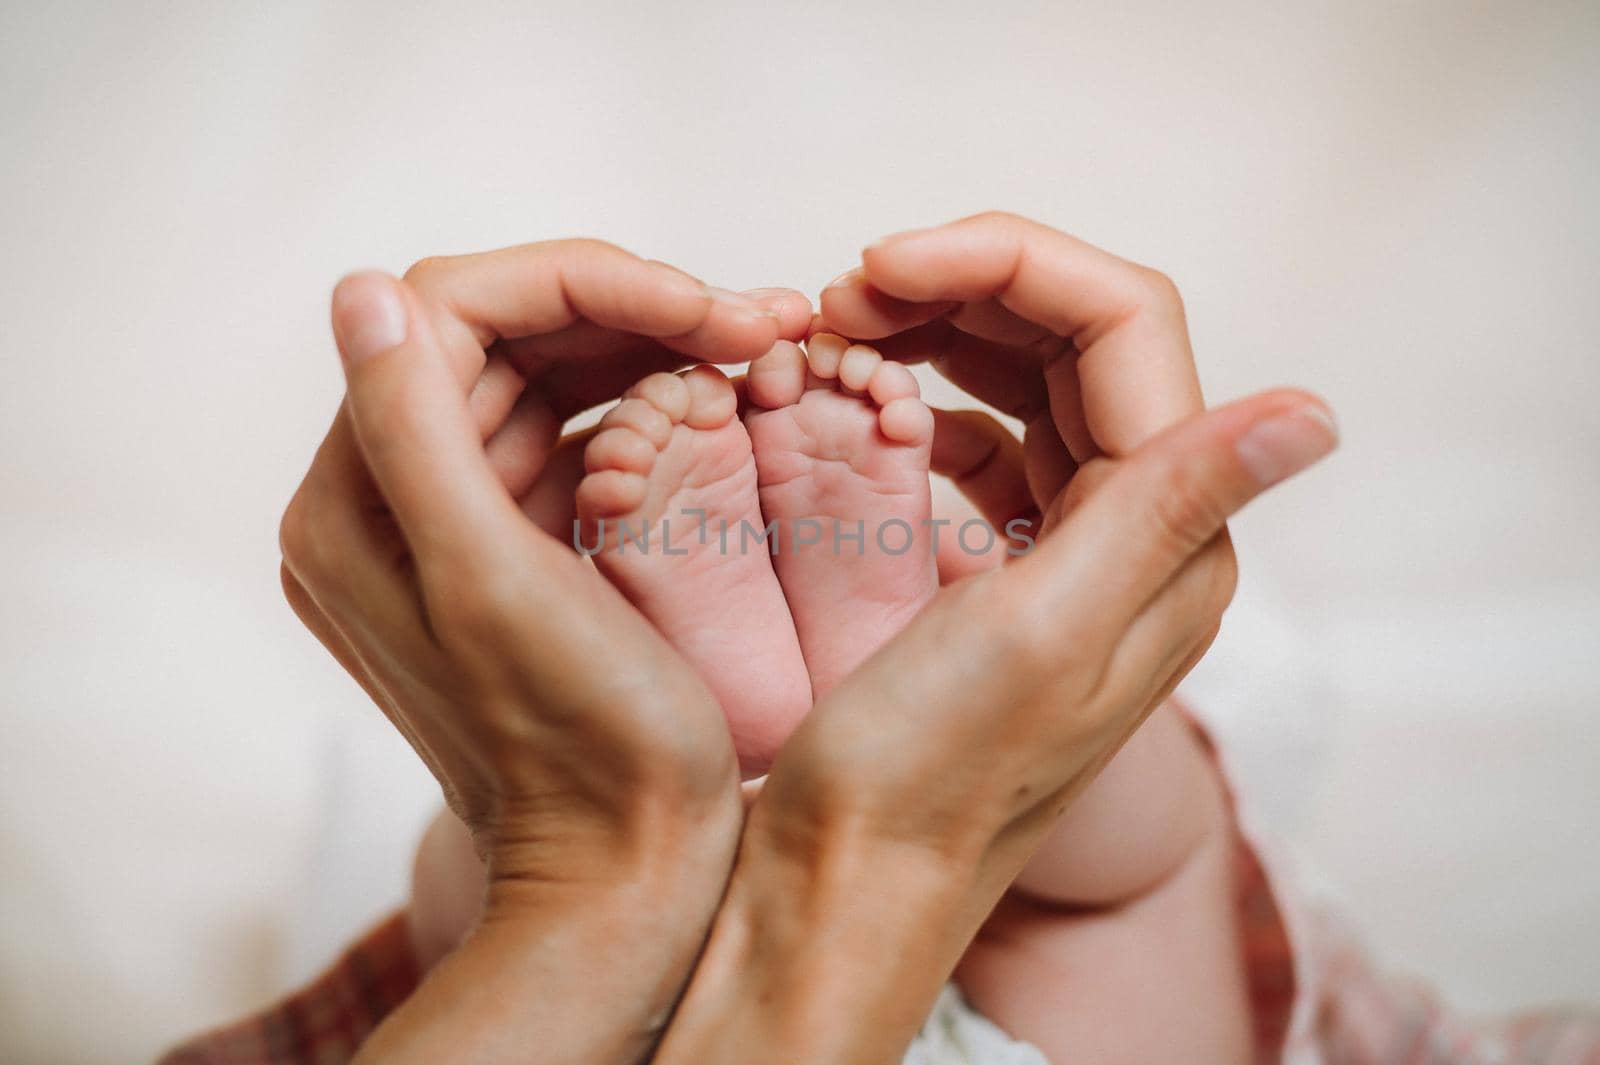 the feet of the newborn in the hands of the mother holds in the form of a heart. children's feet in the hands of the mother.